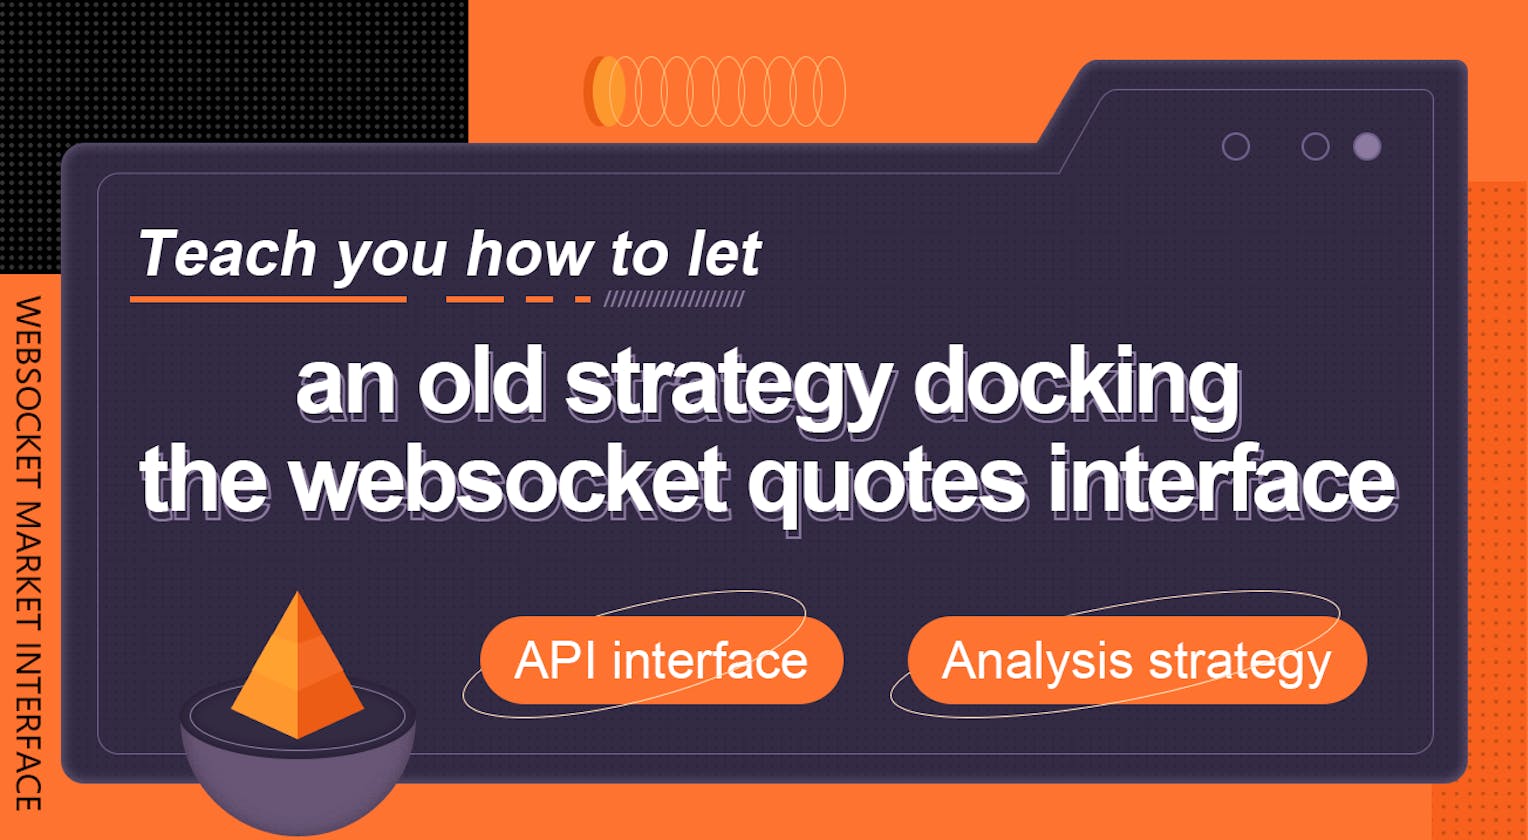 Teach you how to let an old strategy docking the websocket quotes interface